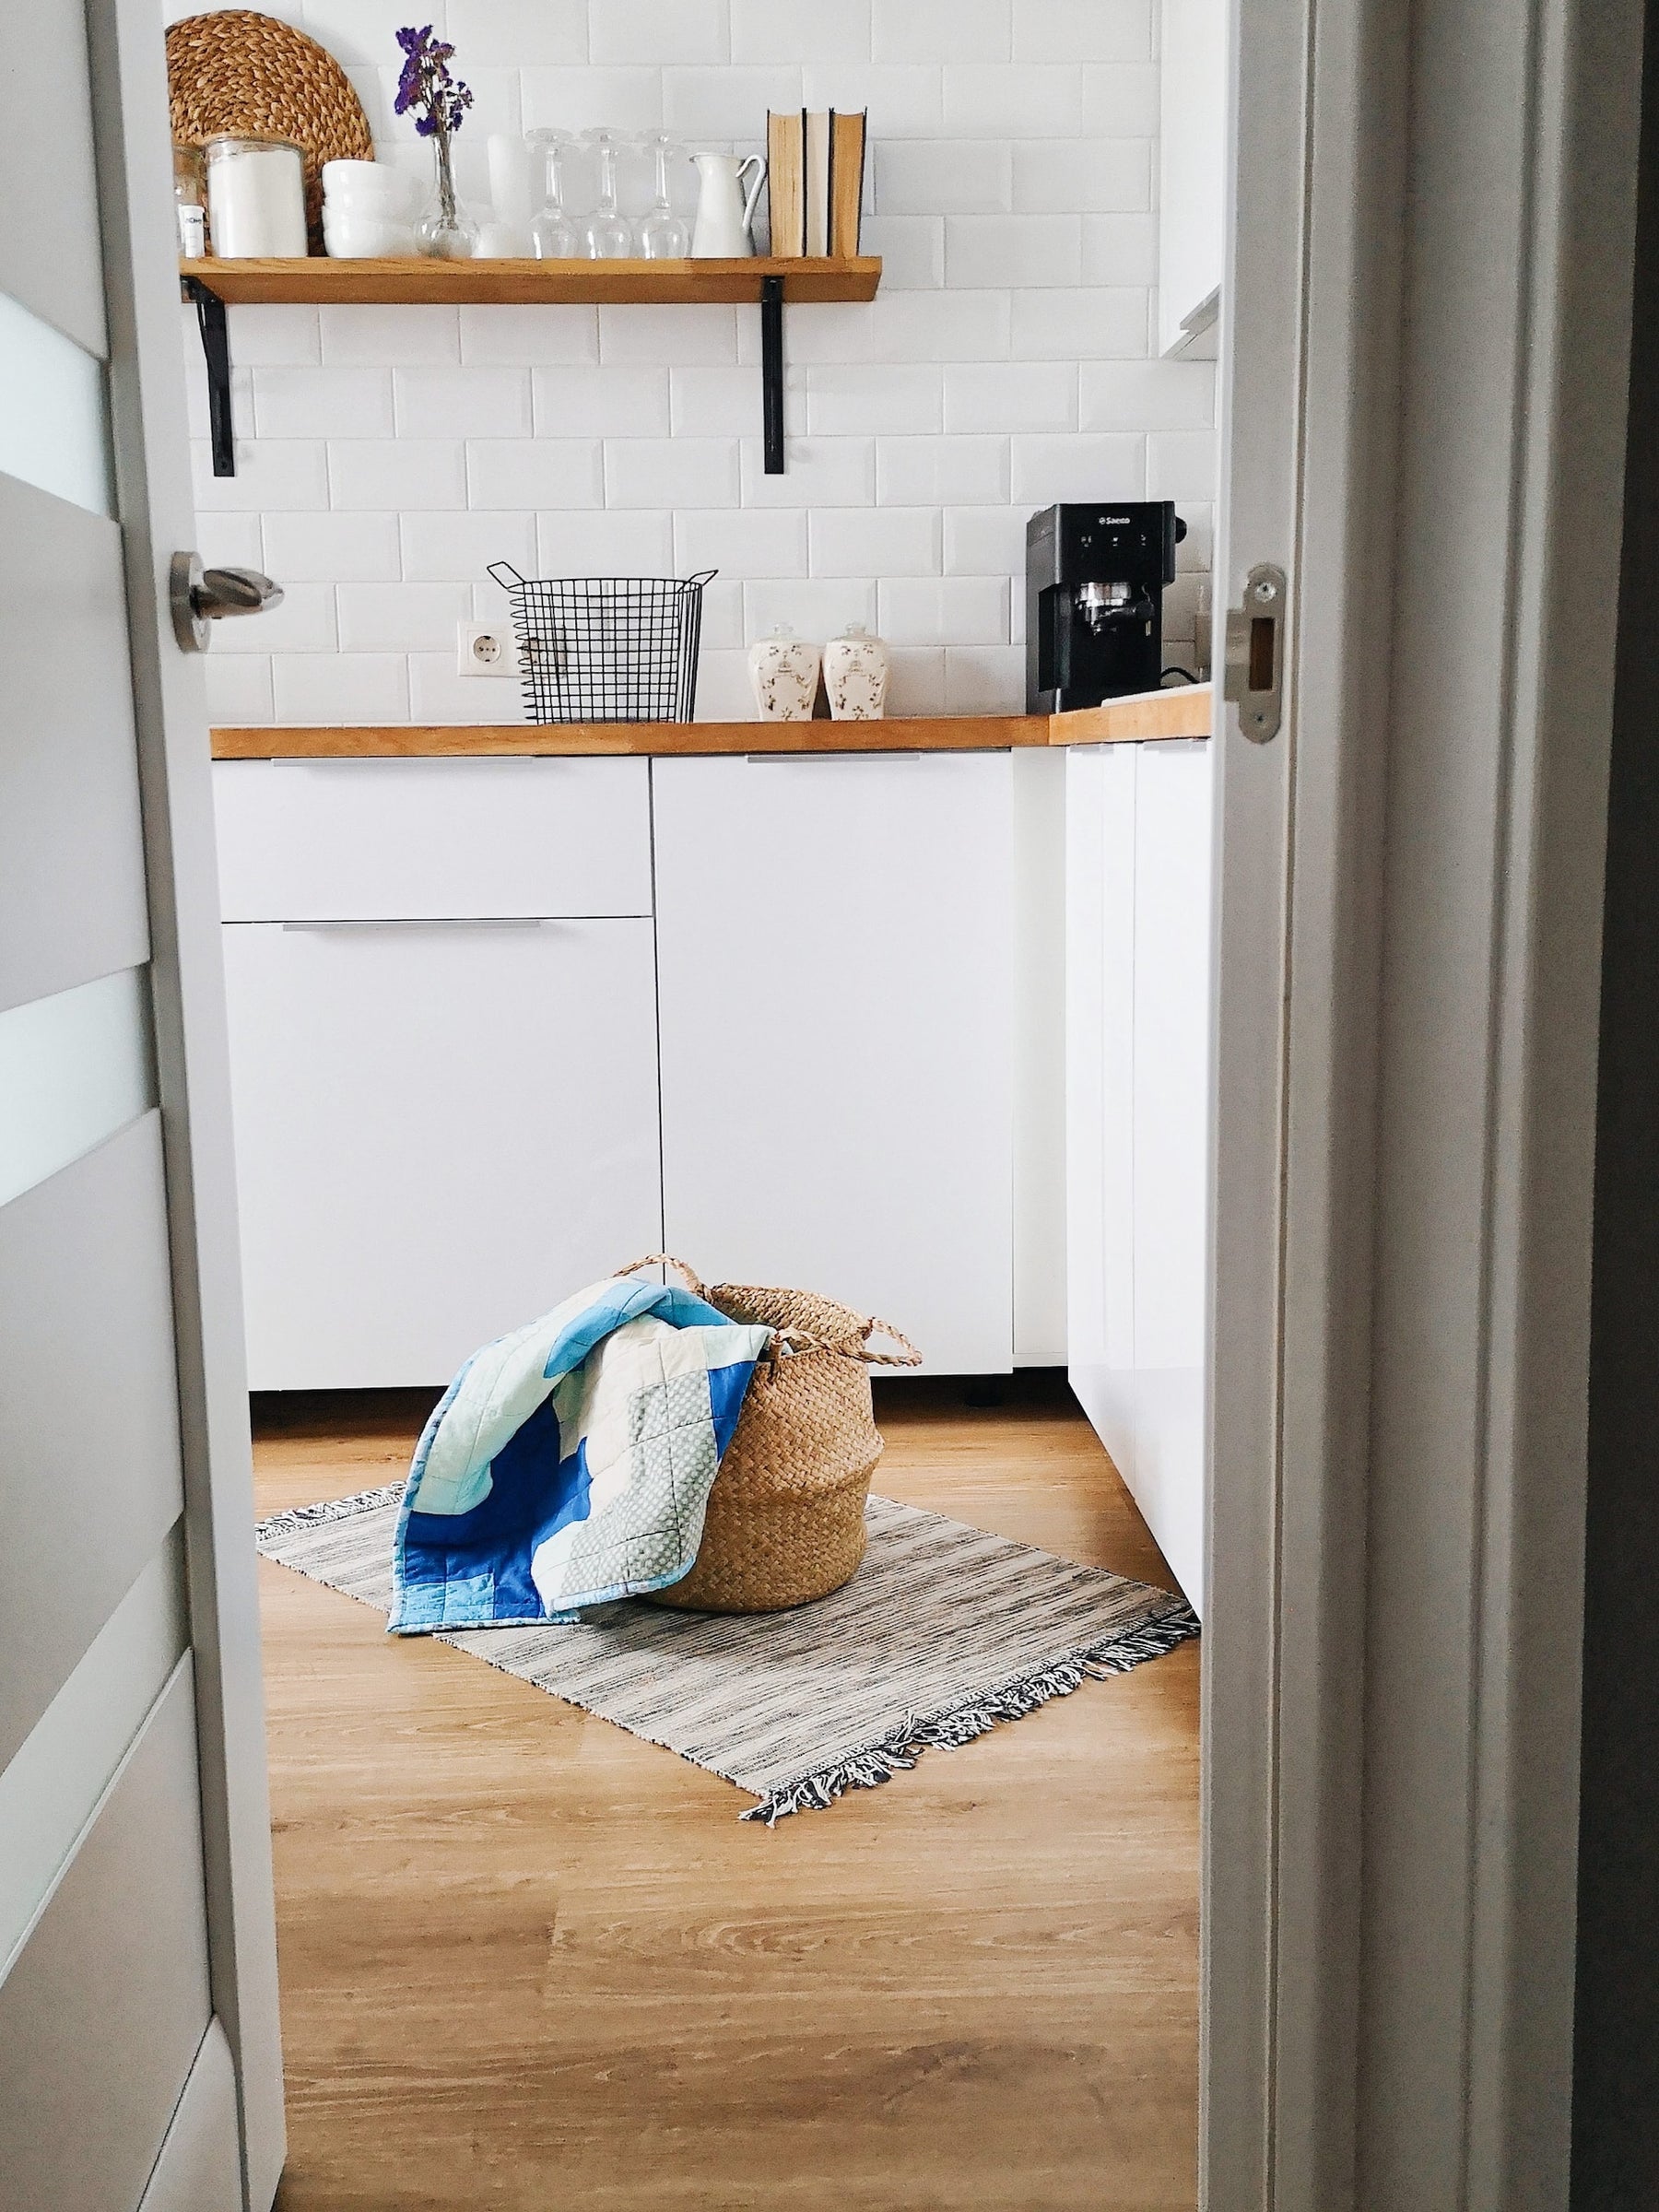 Choosing the Foundation: The 8 Best Flooring Options for Your Laundry Room